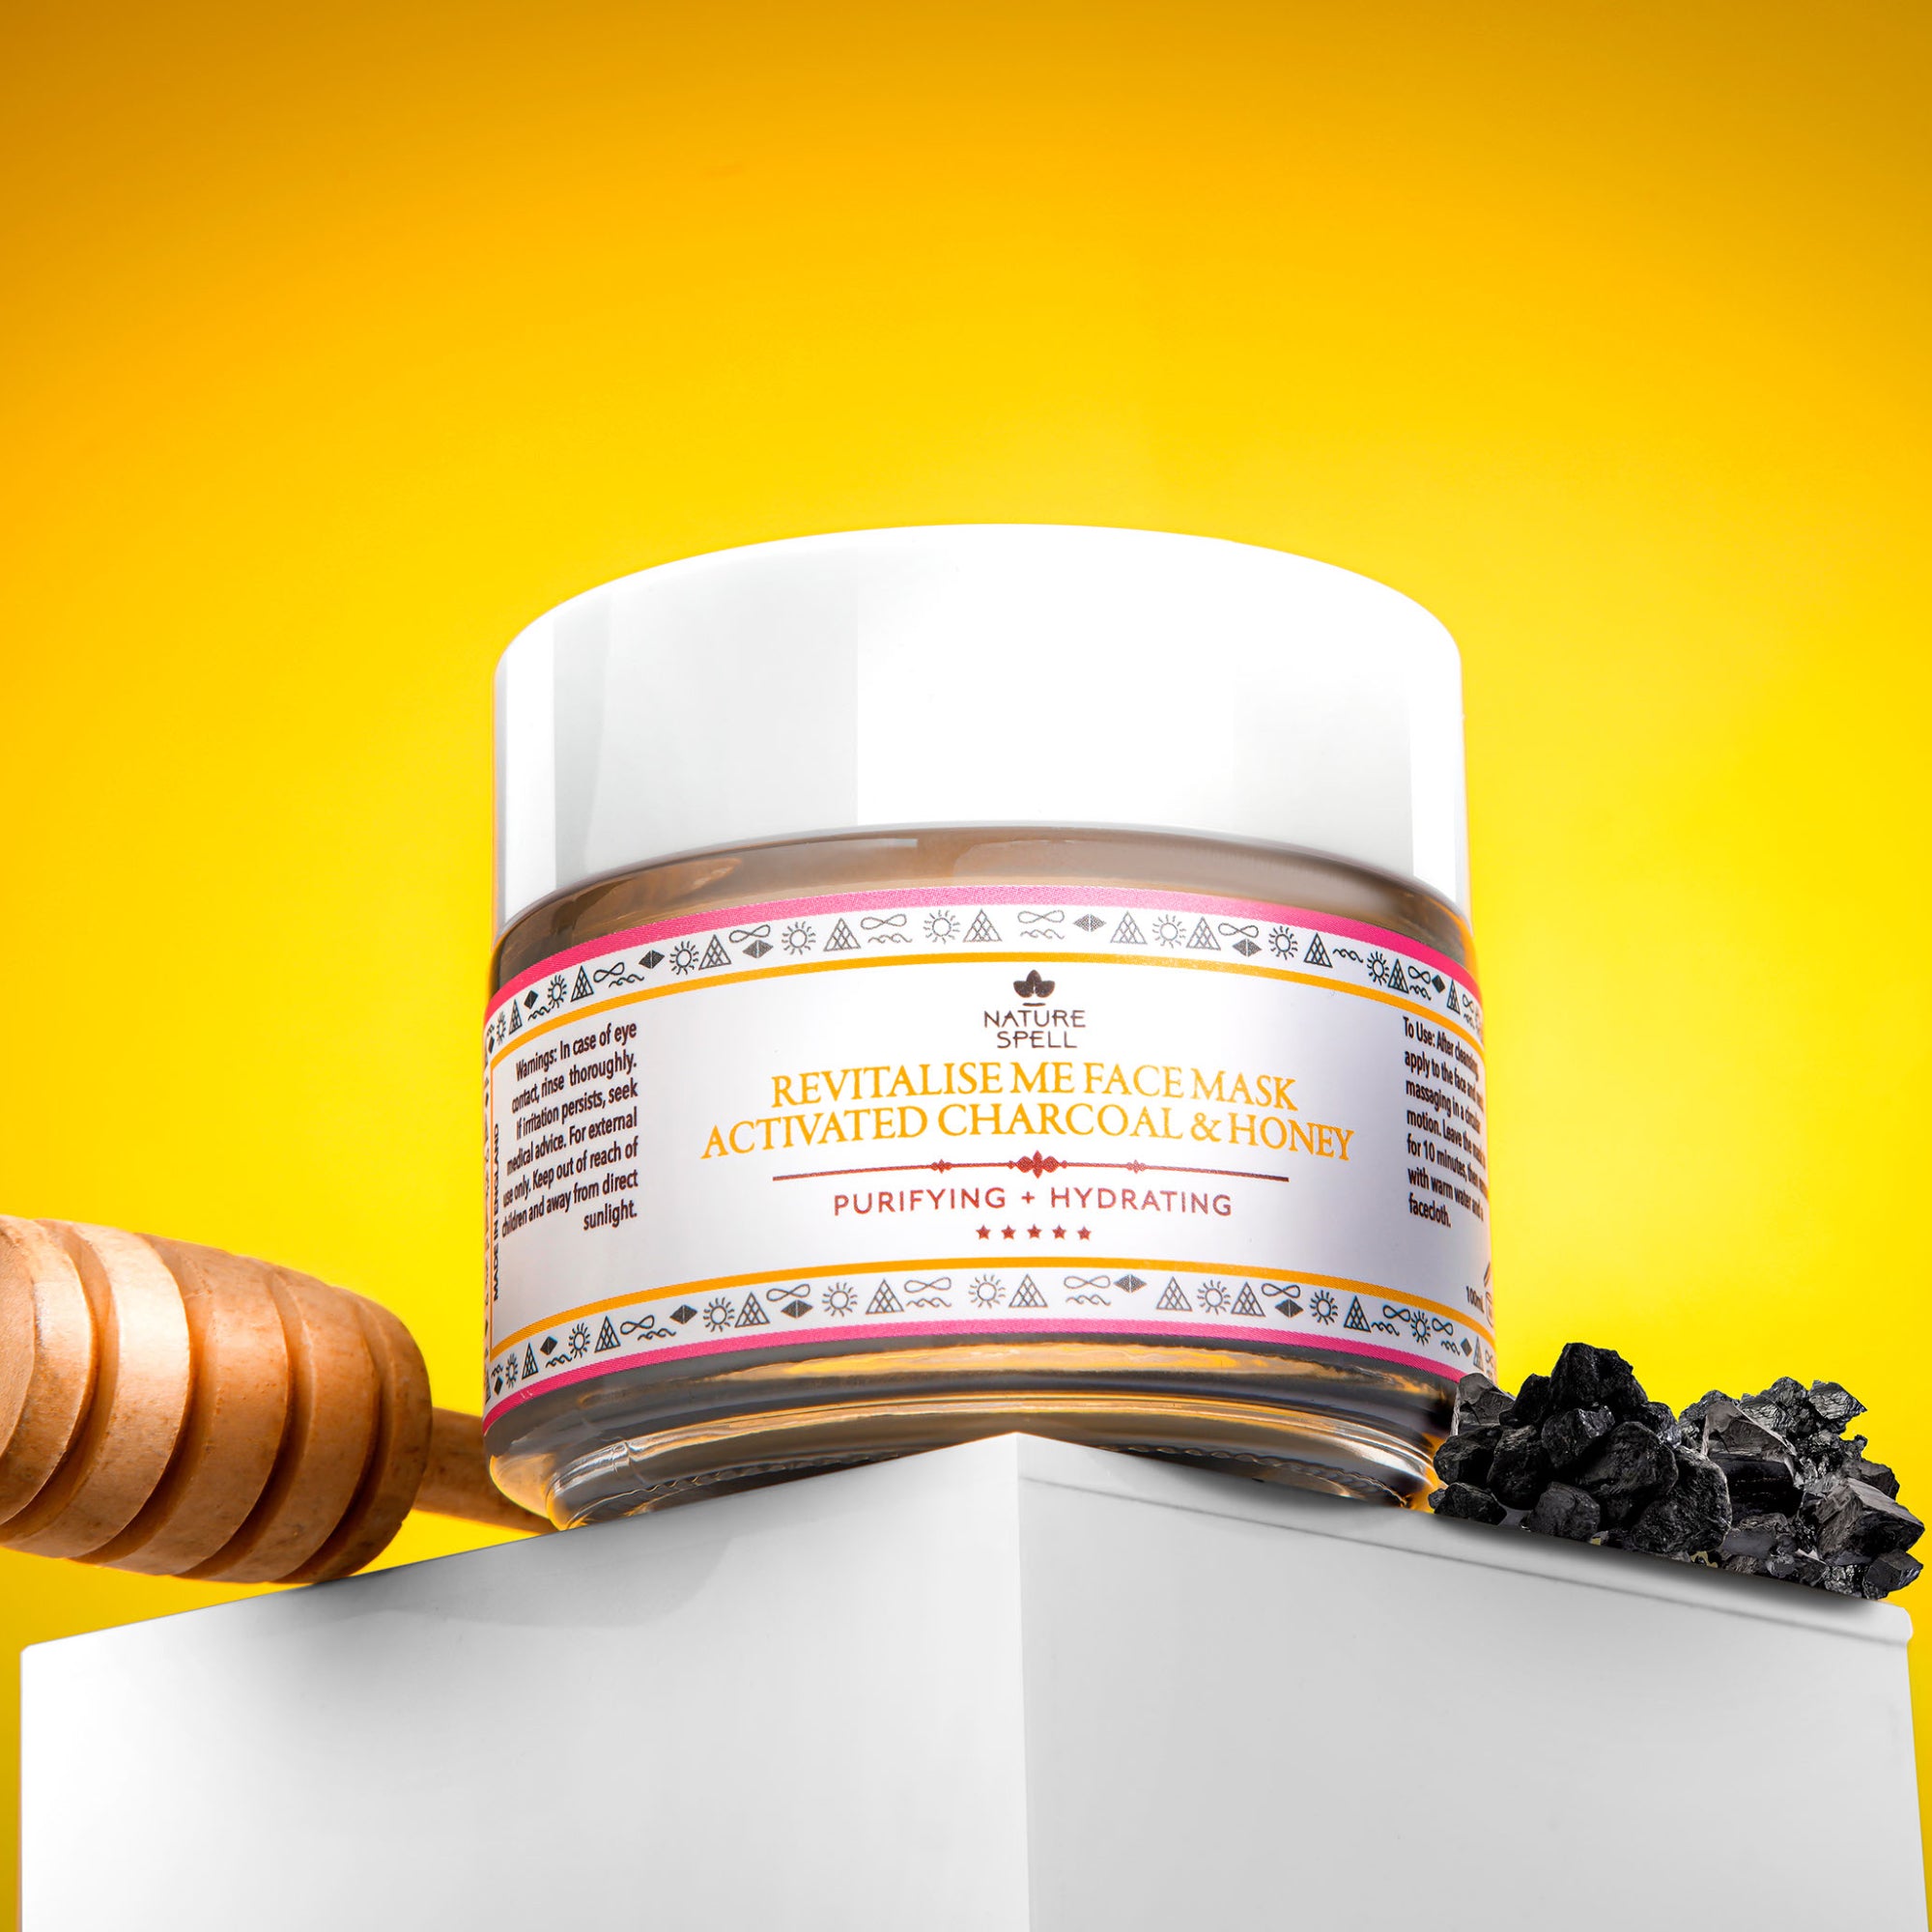 Activated Charcoal & Honey Purifying Face Mask